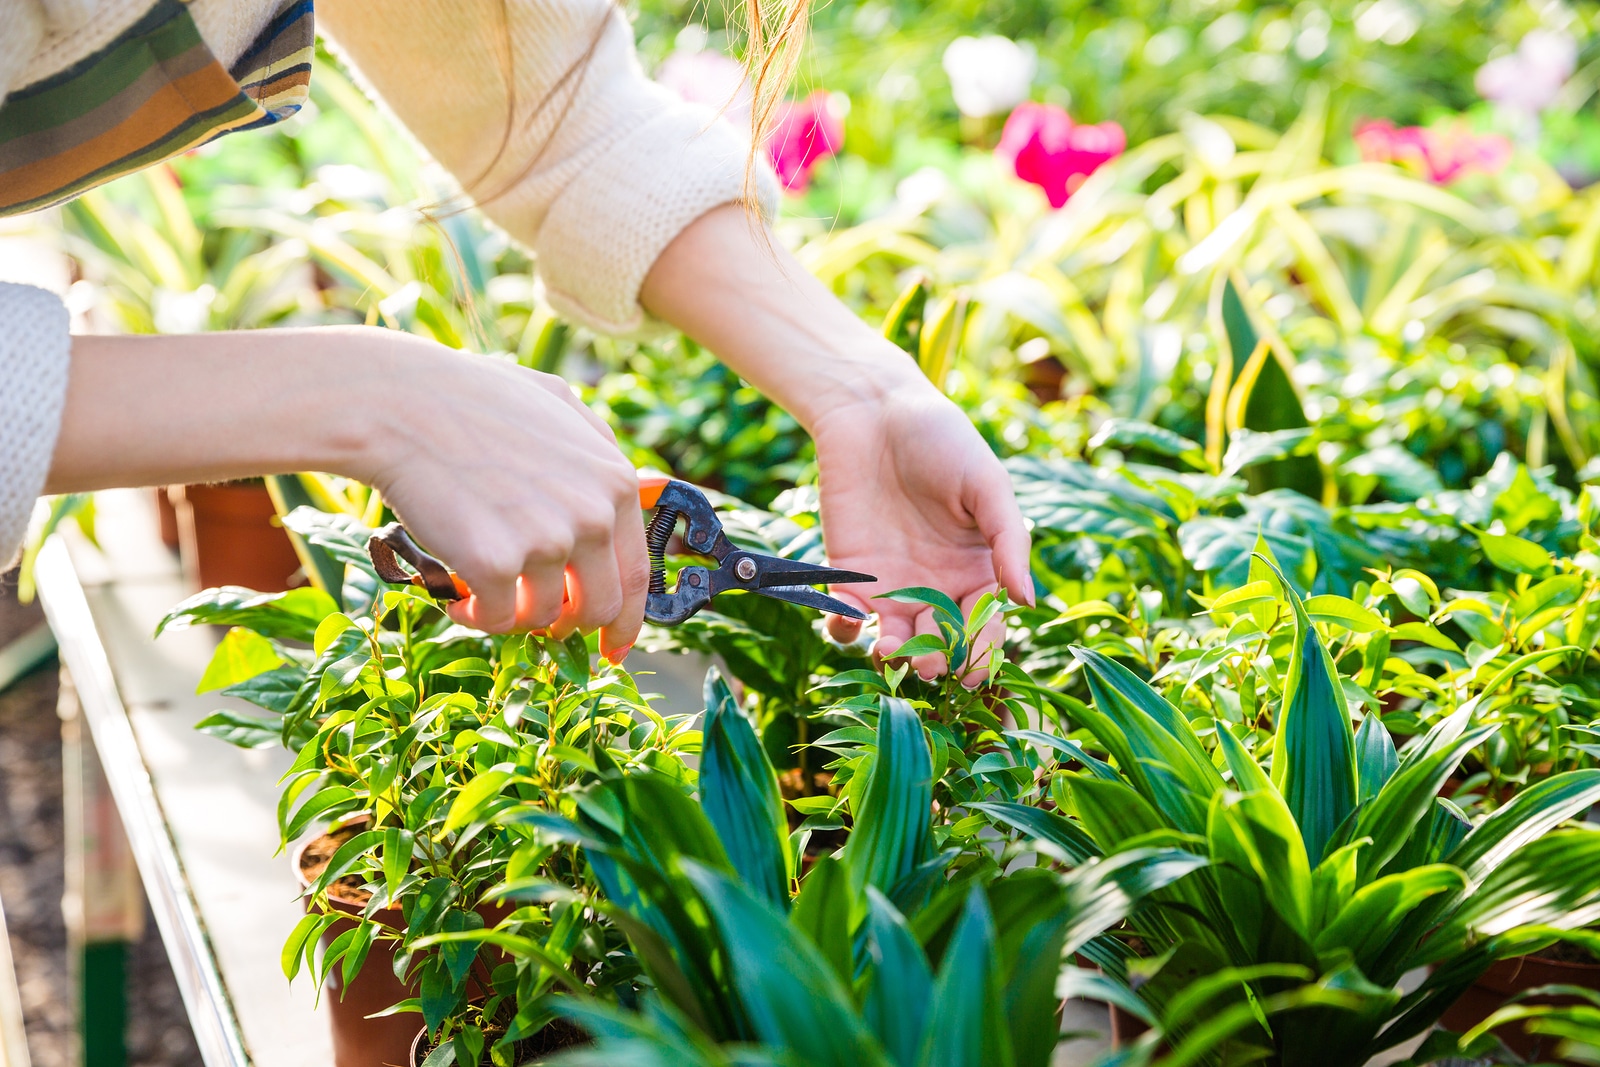 Closeup of hand of woman gardener trimming plants with pruning shears in garden center